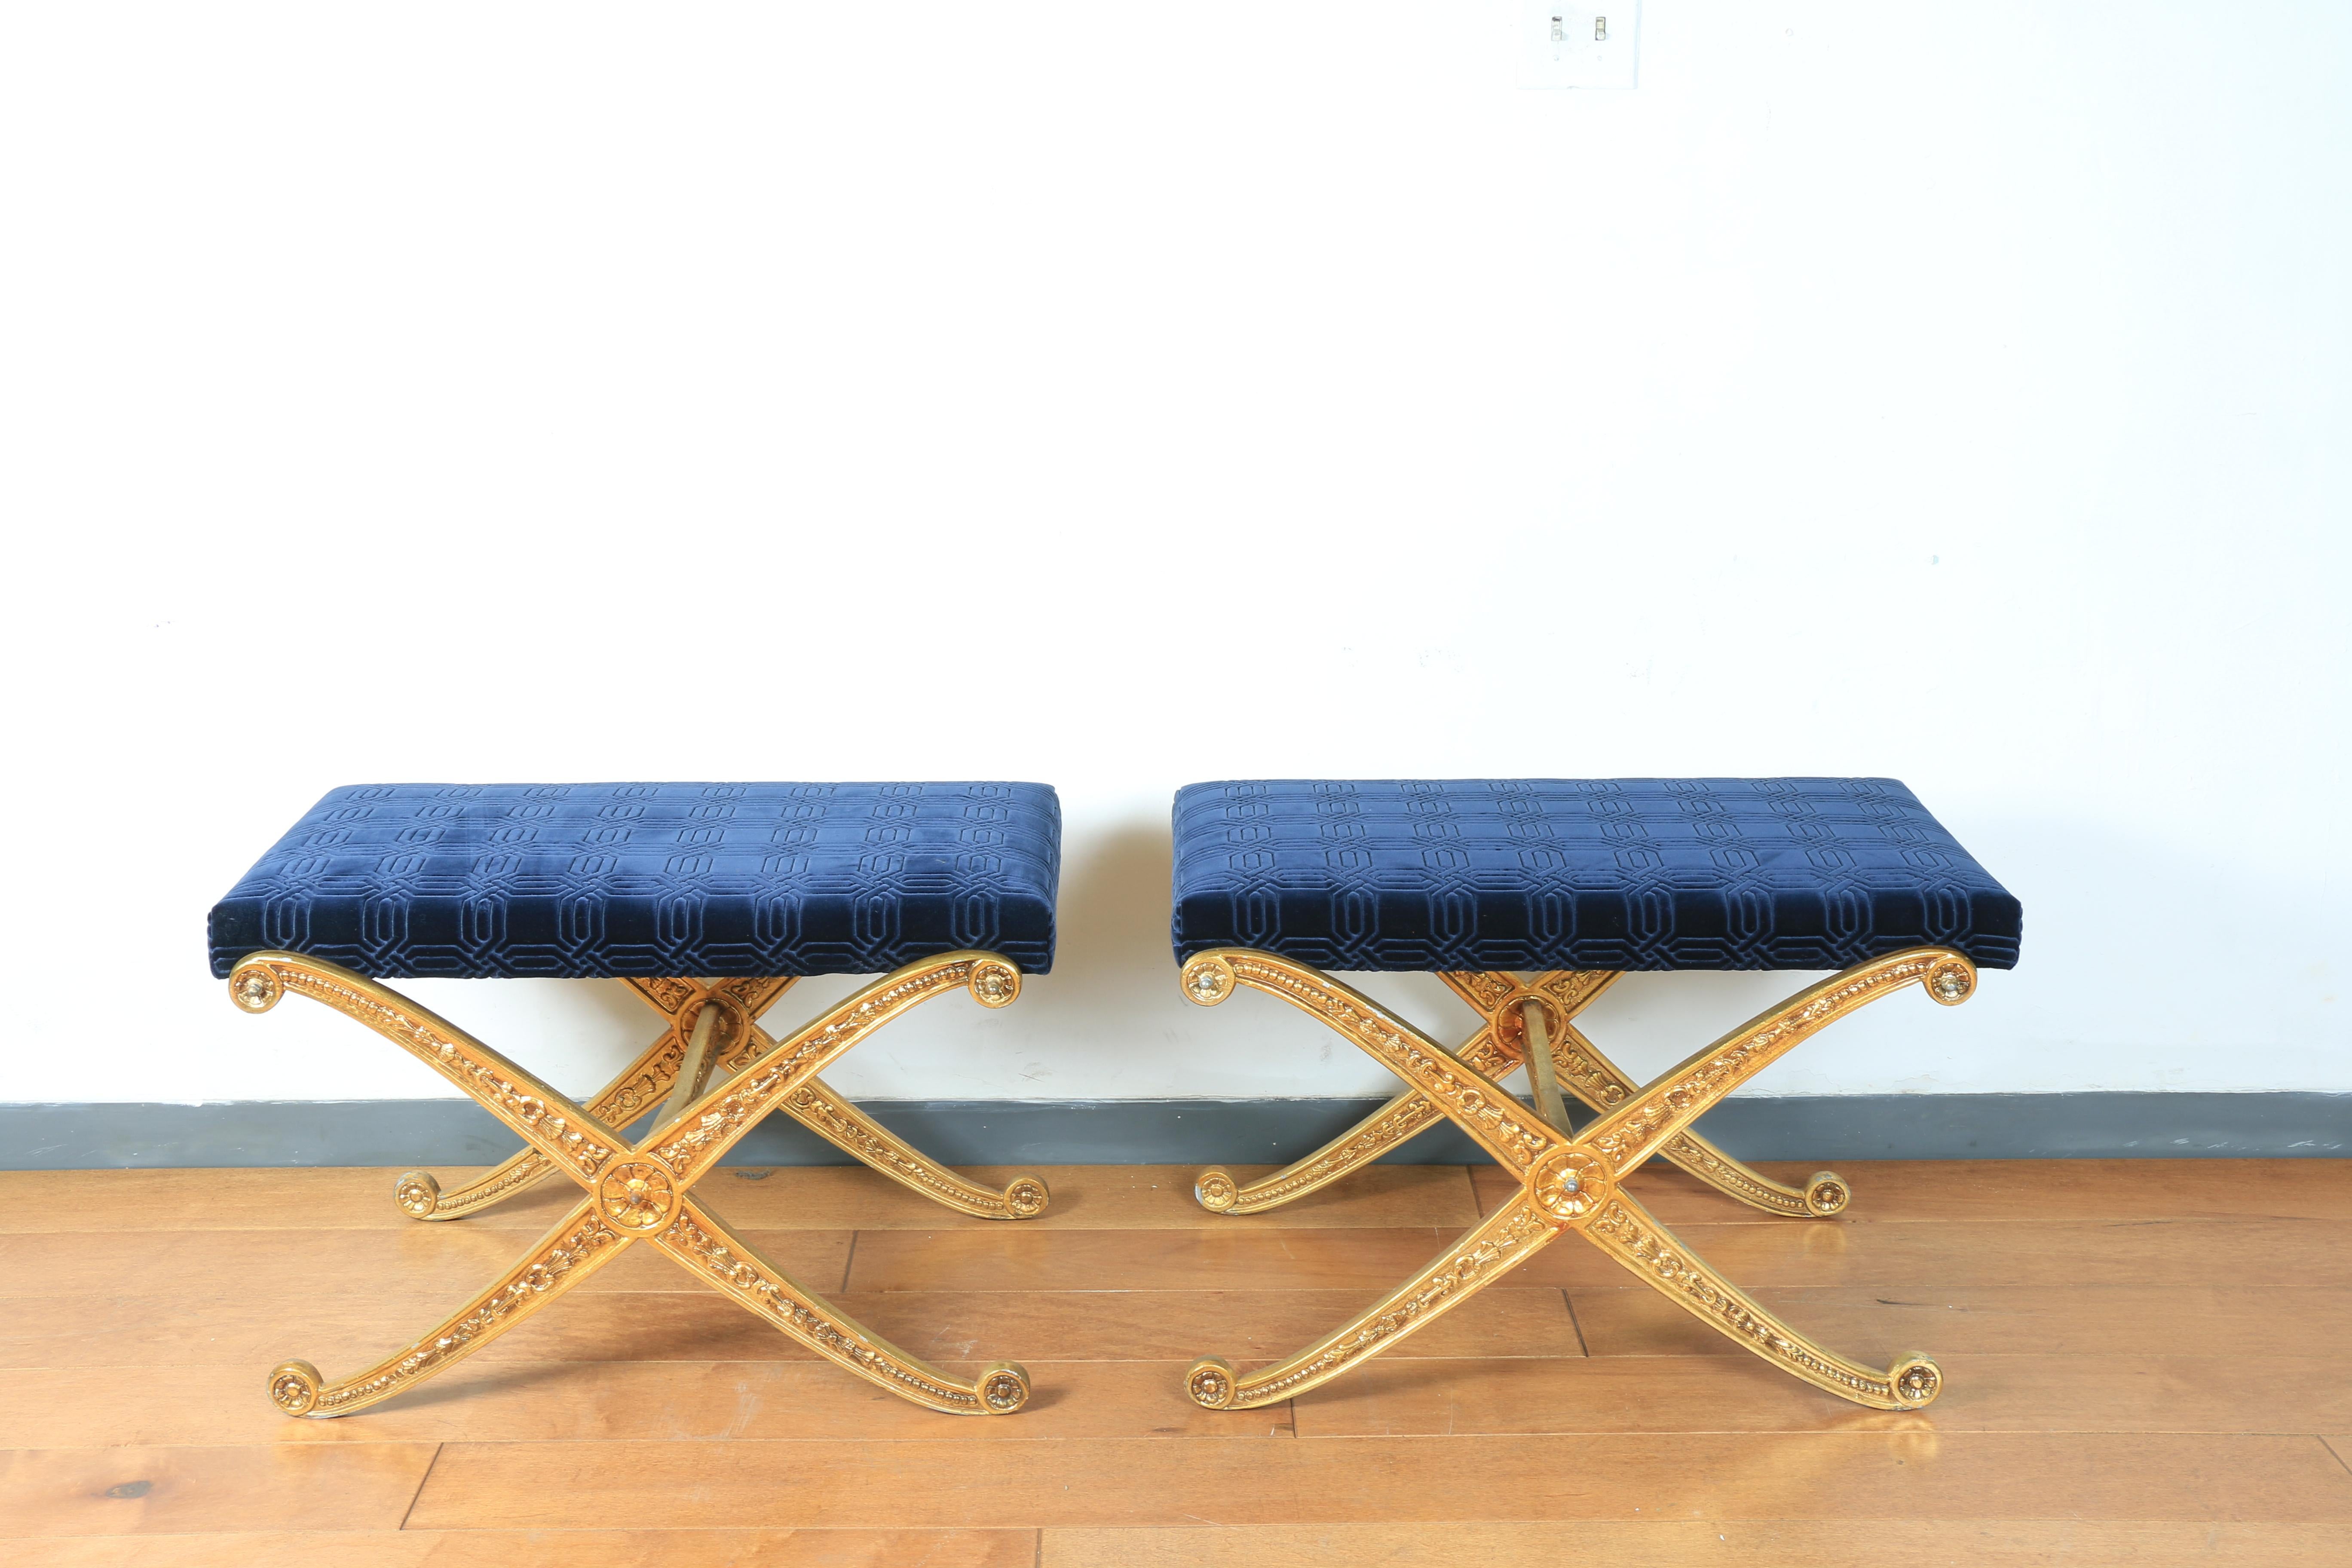 Vintage metal gold base benches with blue upholstery. No rips or stains. Metal gold bases are heavy. Great for any decor and can be sold separately. 

$950 each.